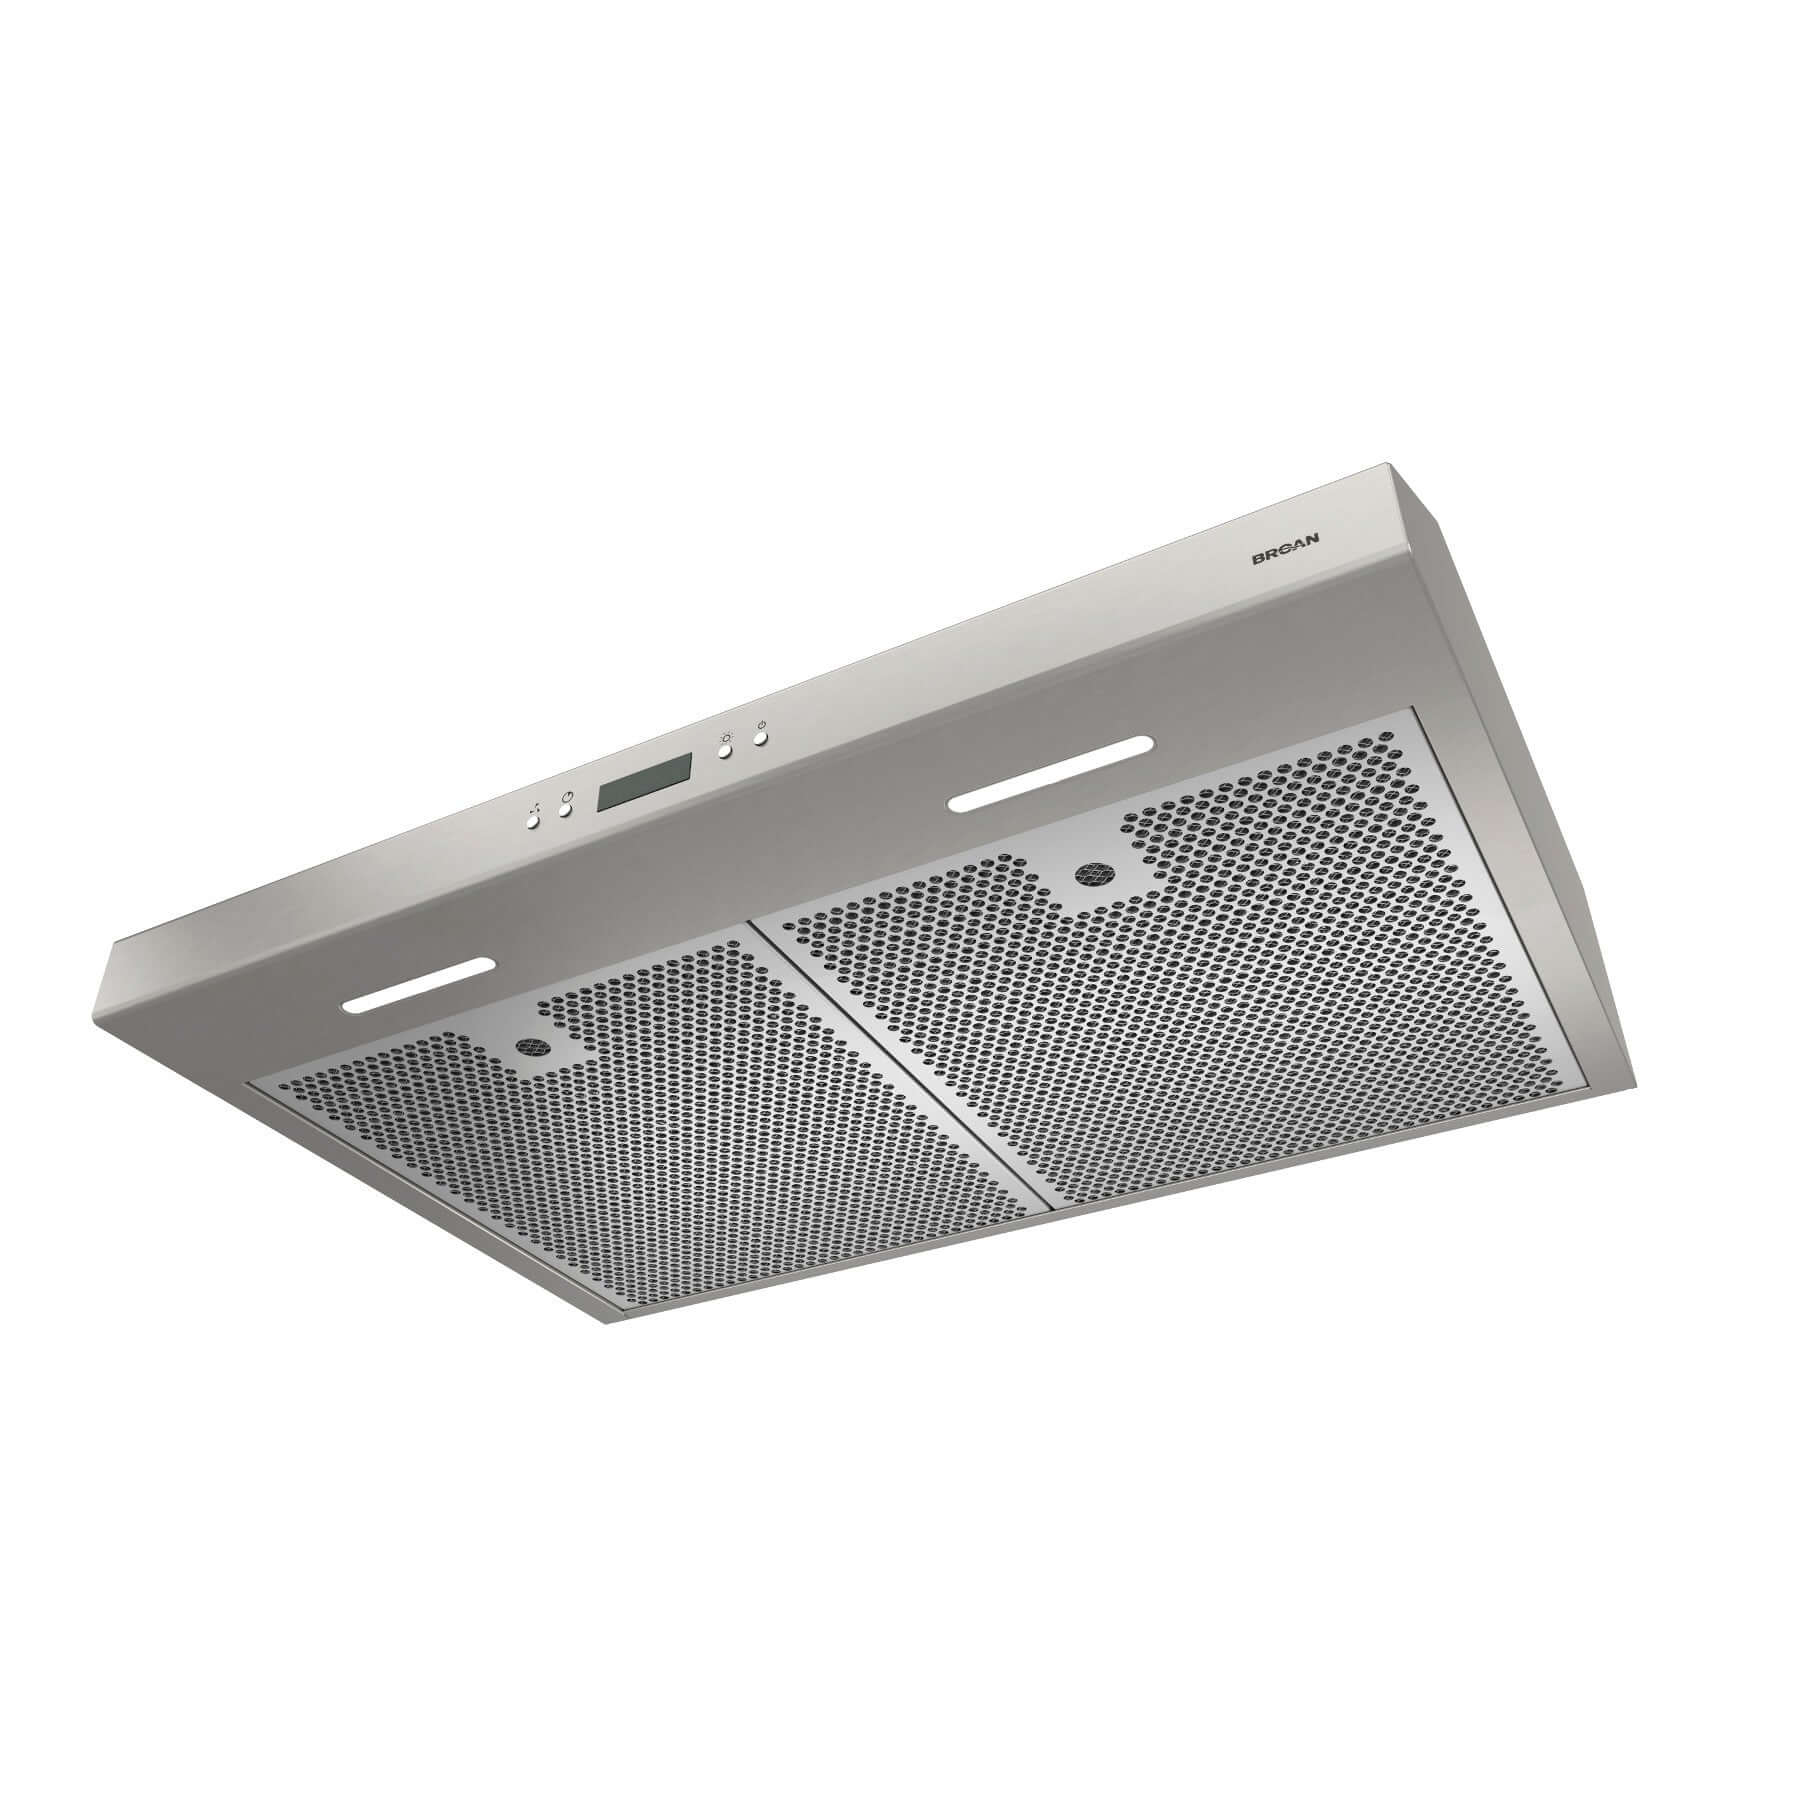 Broan Glacier Series Under-Cabinet Range Hood with Heat Sentry In Stainless Steel with Size Options (BCDJ1)